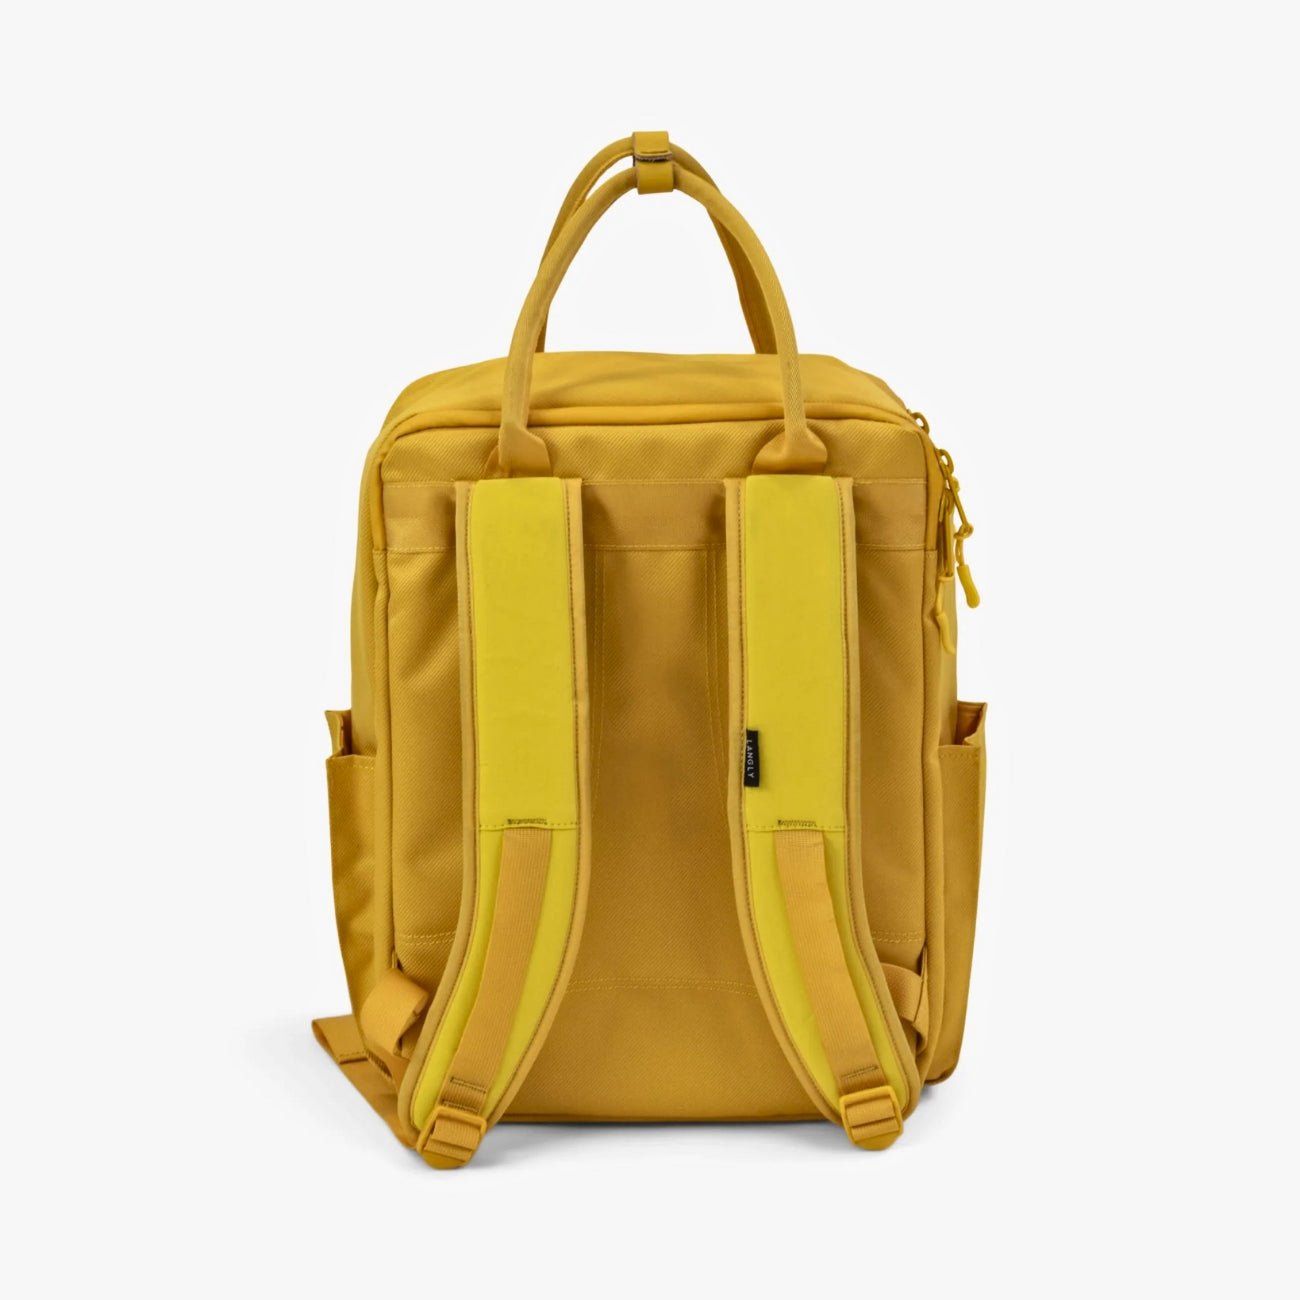 Langly Sierra Camera Backpack - Aspen Gold in a Back View